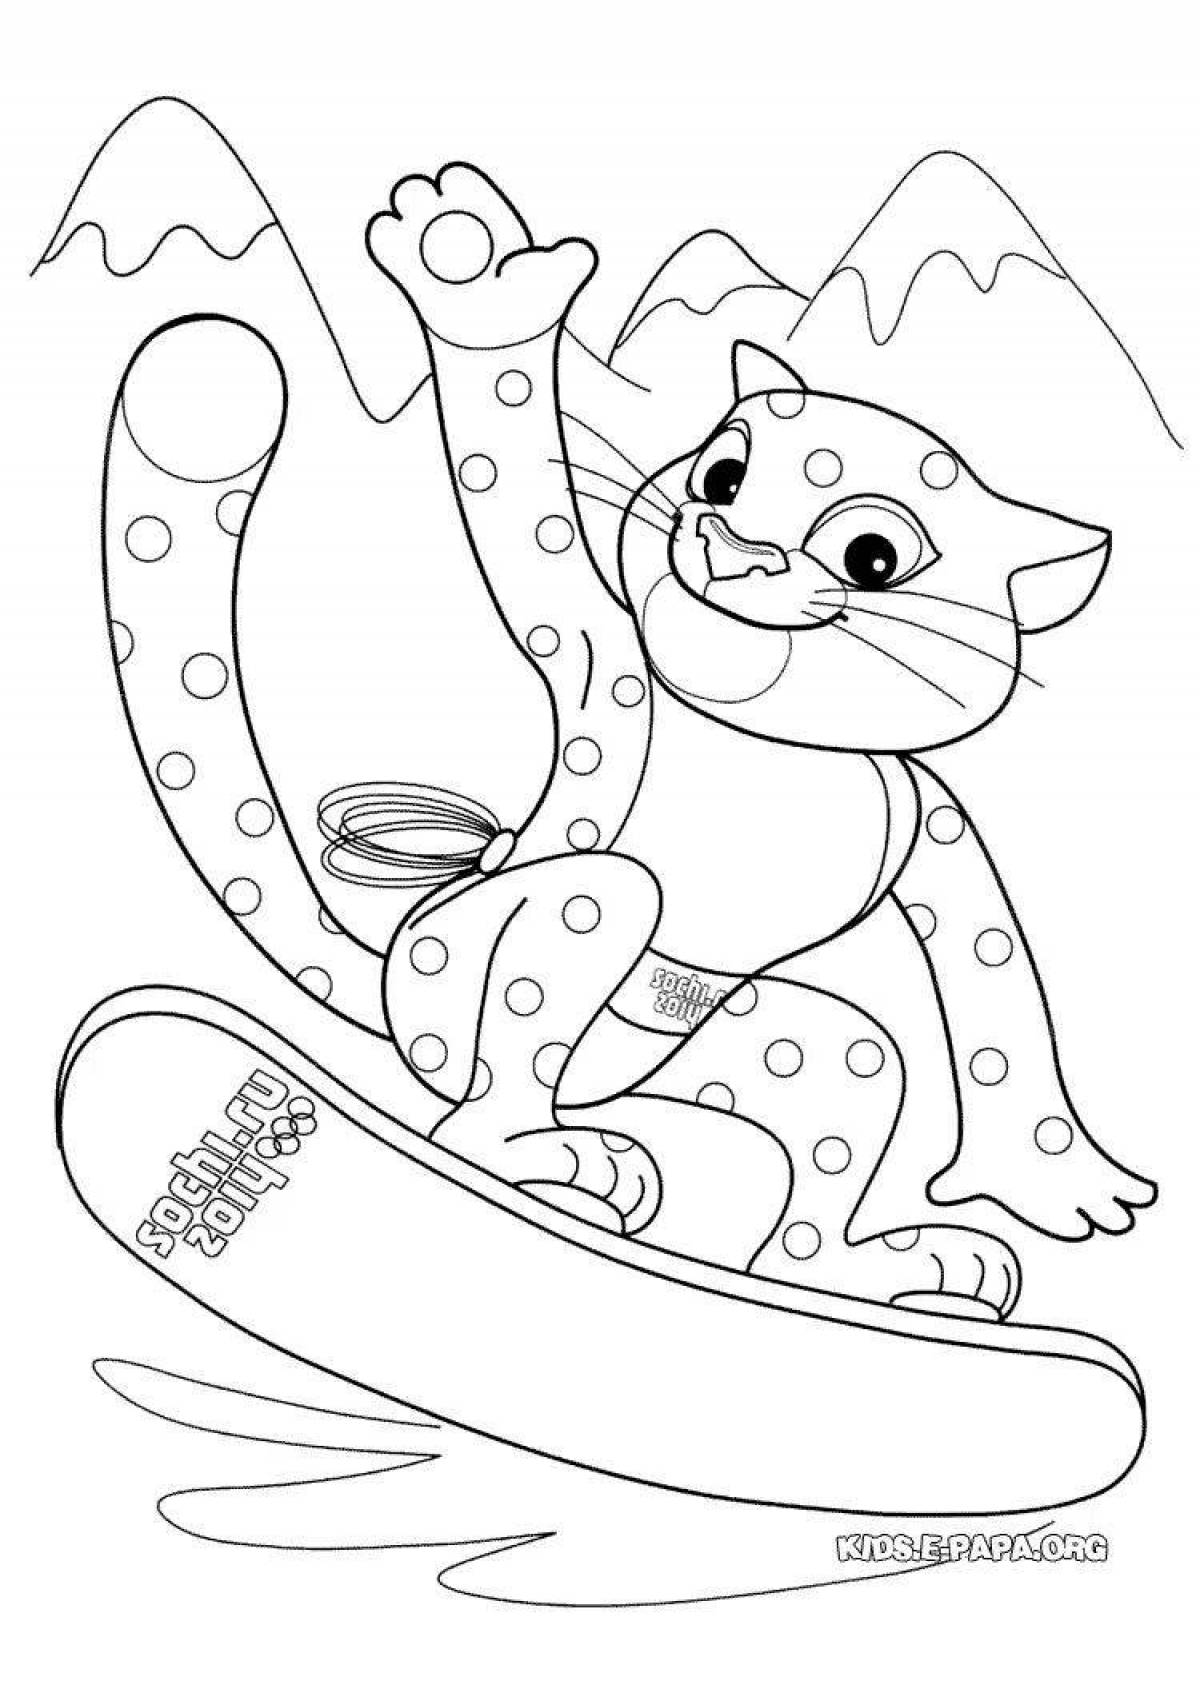 Amazing sochi coloring page